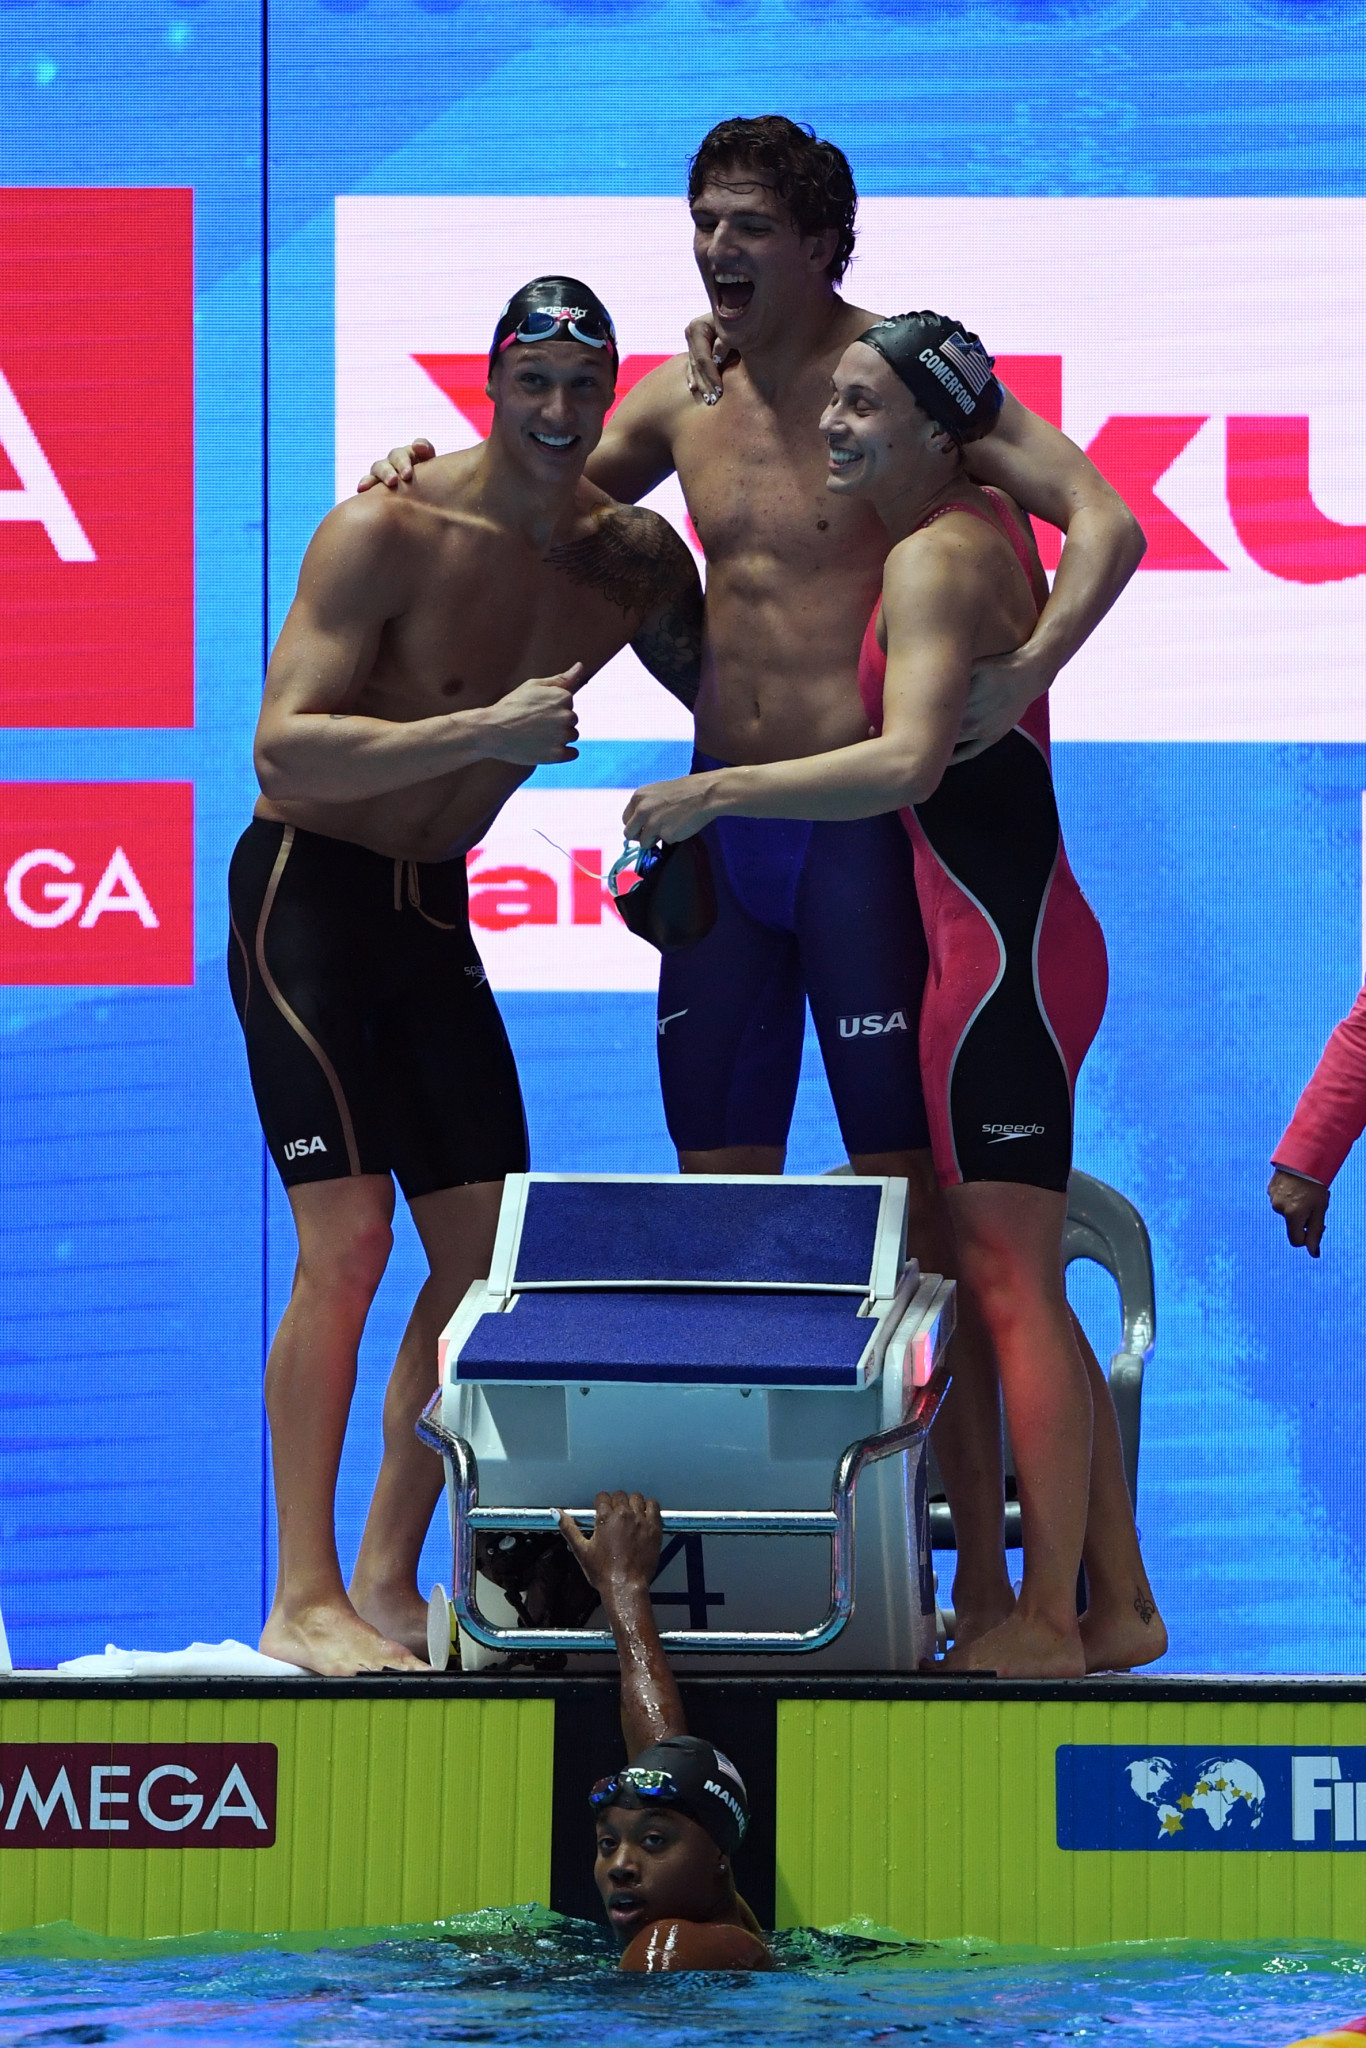 US set 4x100m mixed freestyle relay world record at World Aquatics Championships to complete stunning night of domination